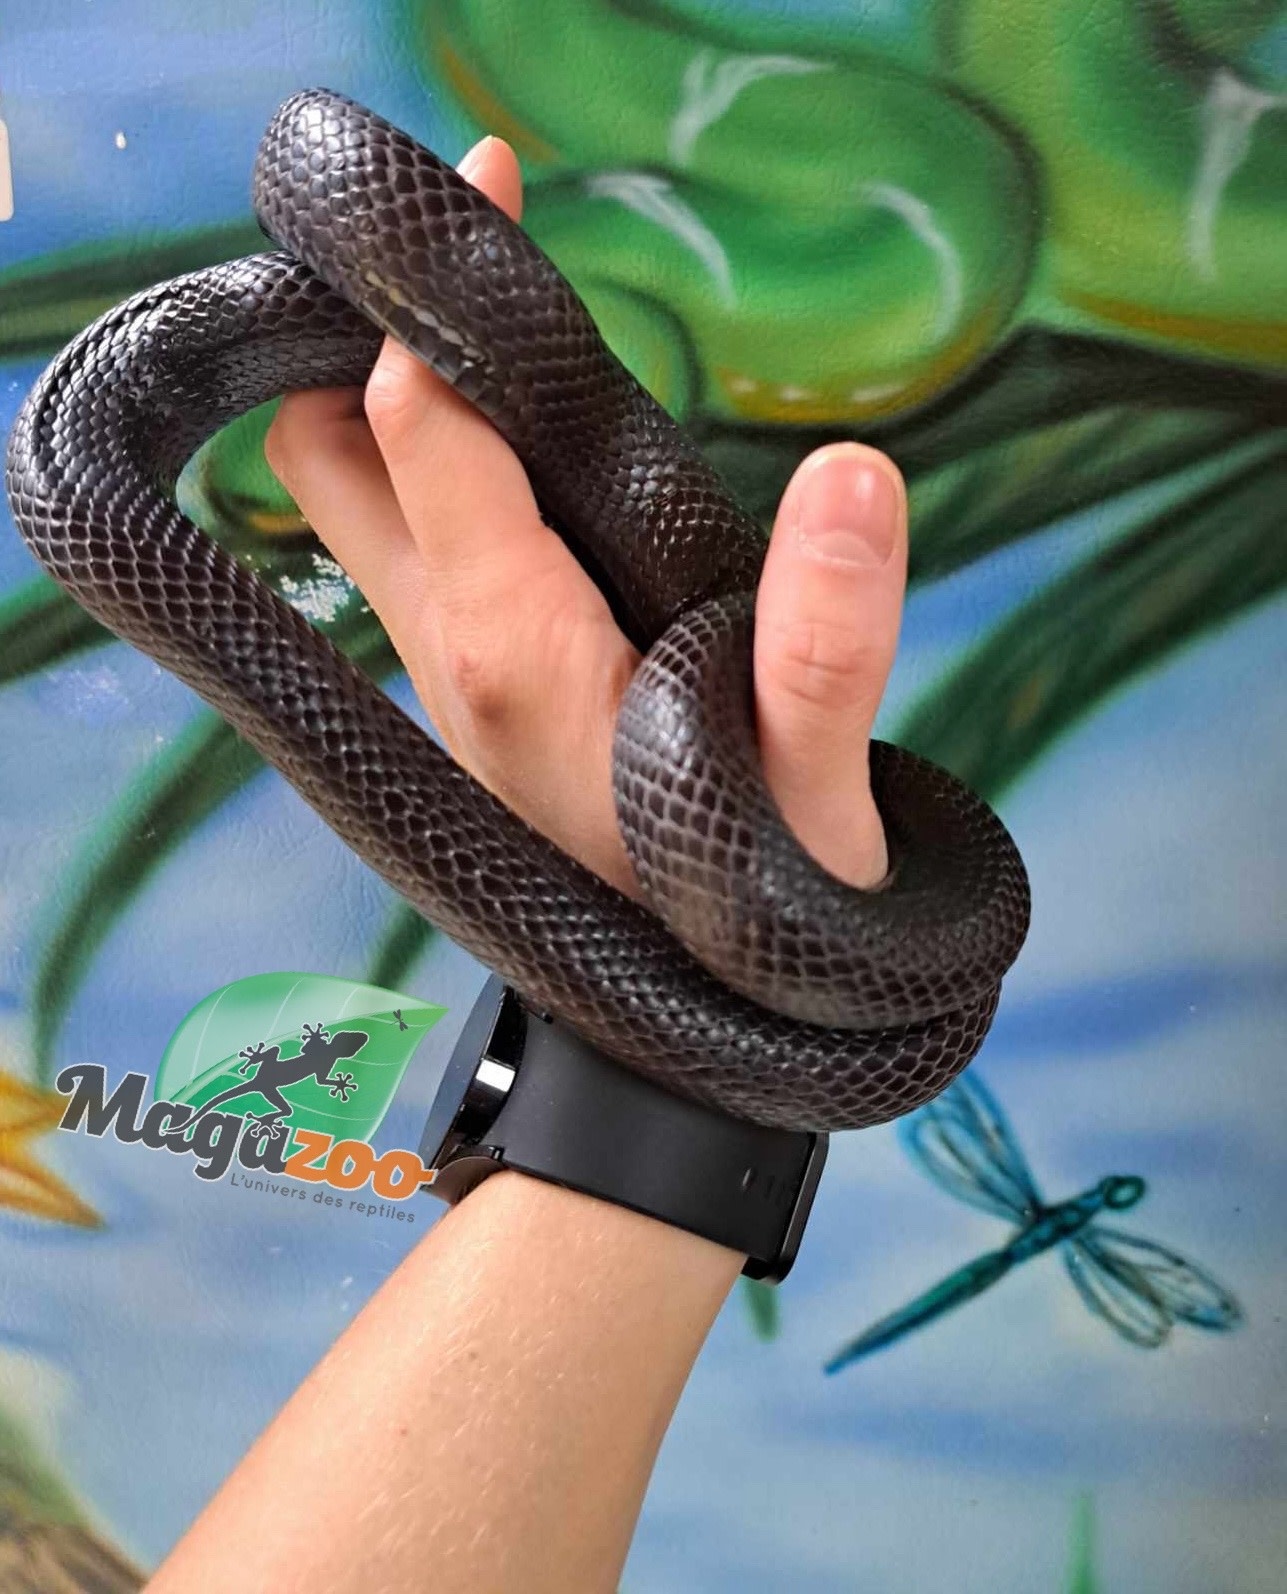 Magazoo Mexican black king snake (Male) 2 years old